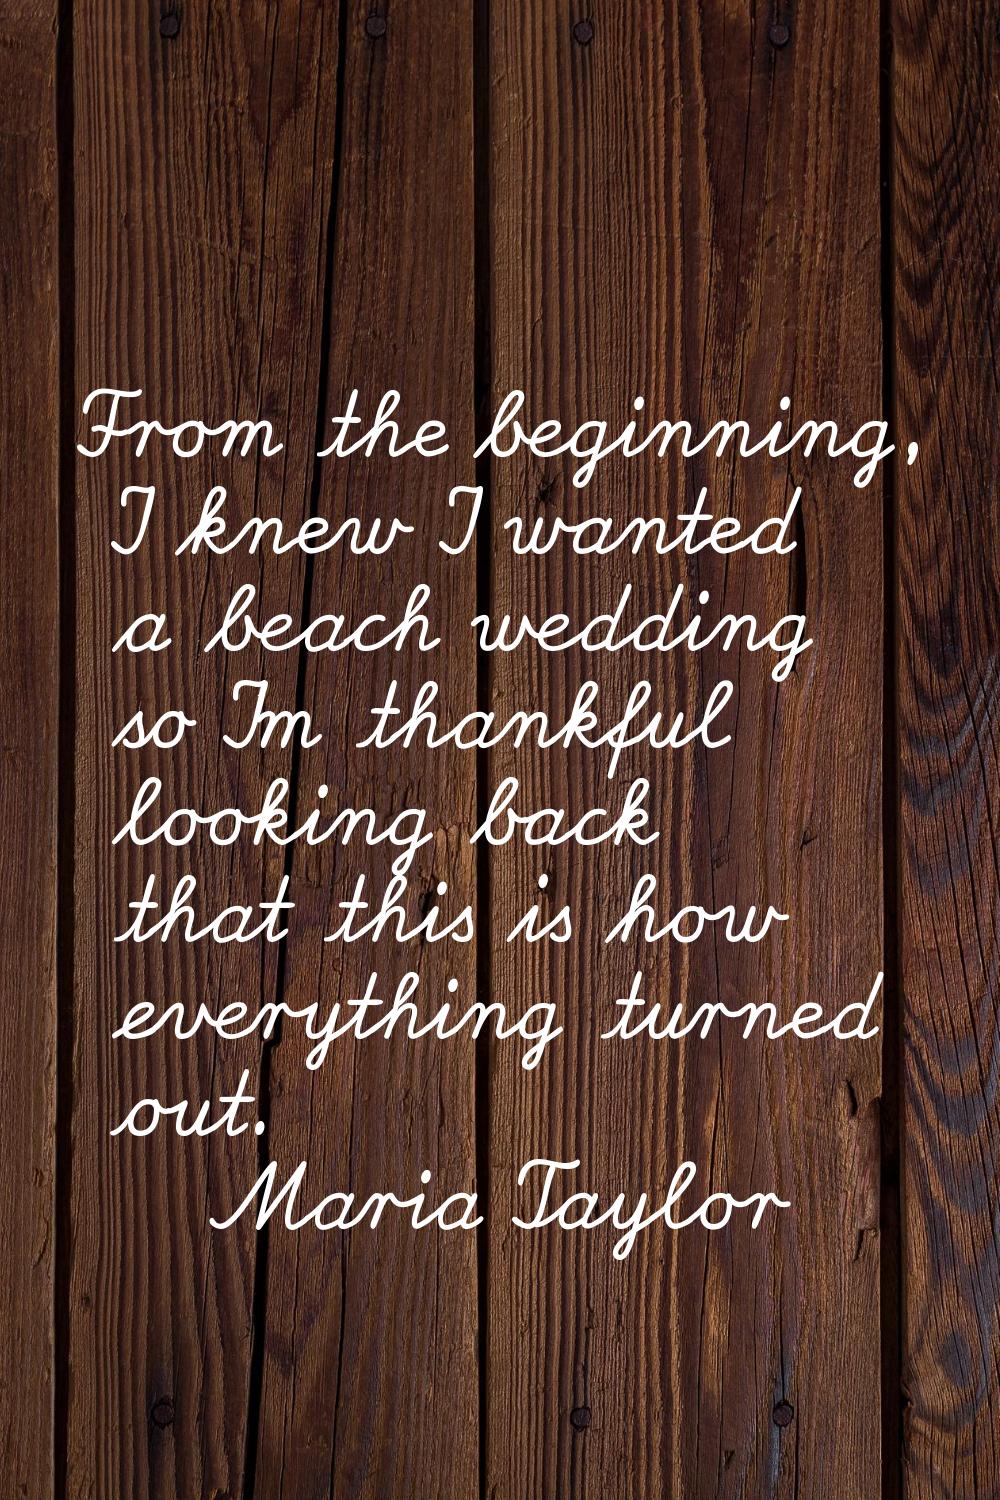 From the beginning, I knew I wanted a beach wedding so I’m thankful looking back that this is how e